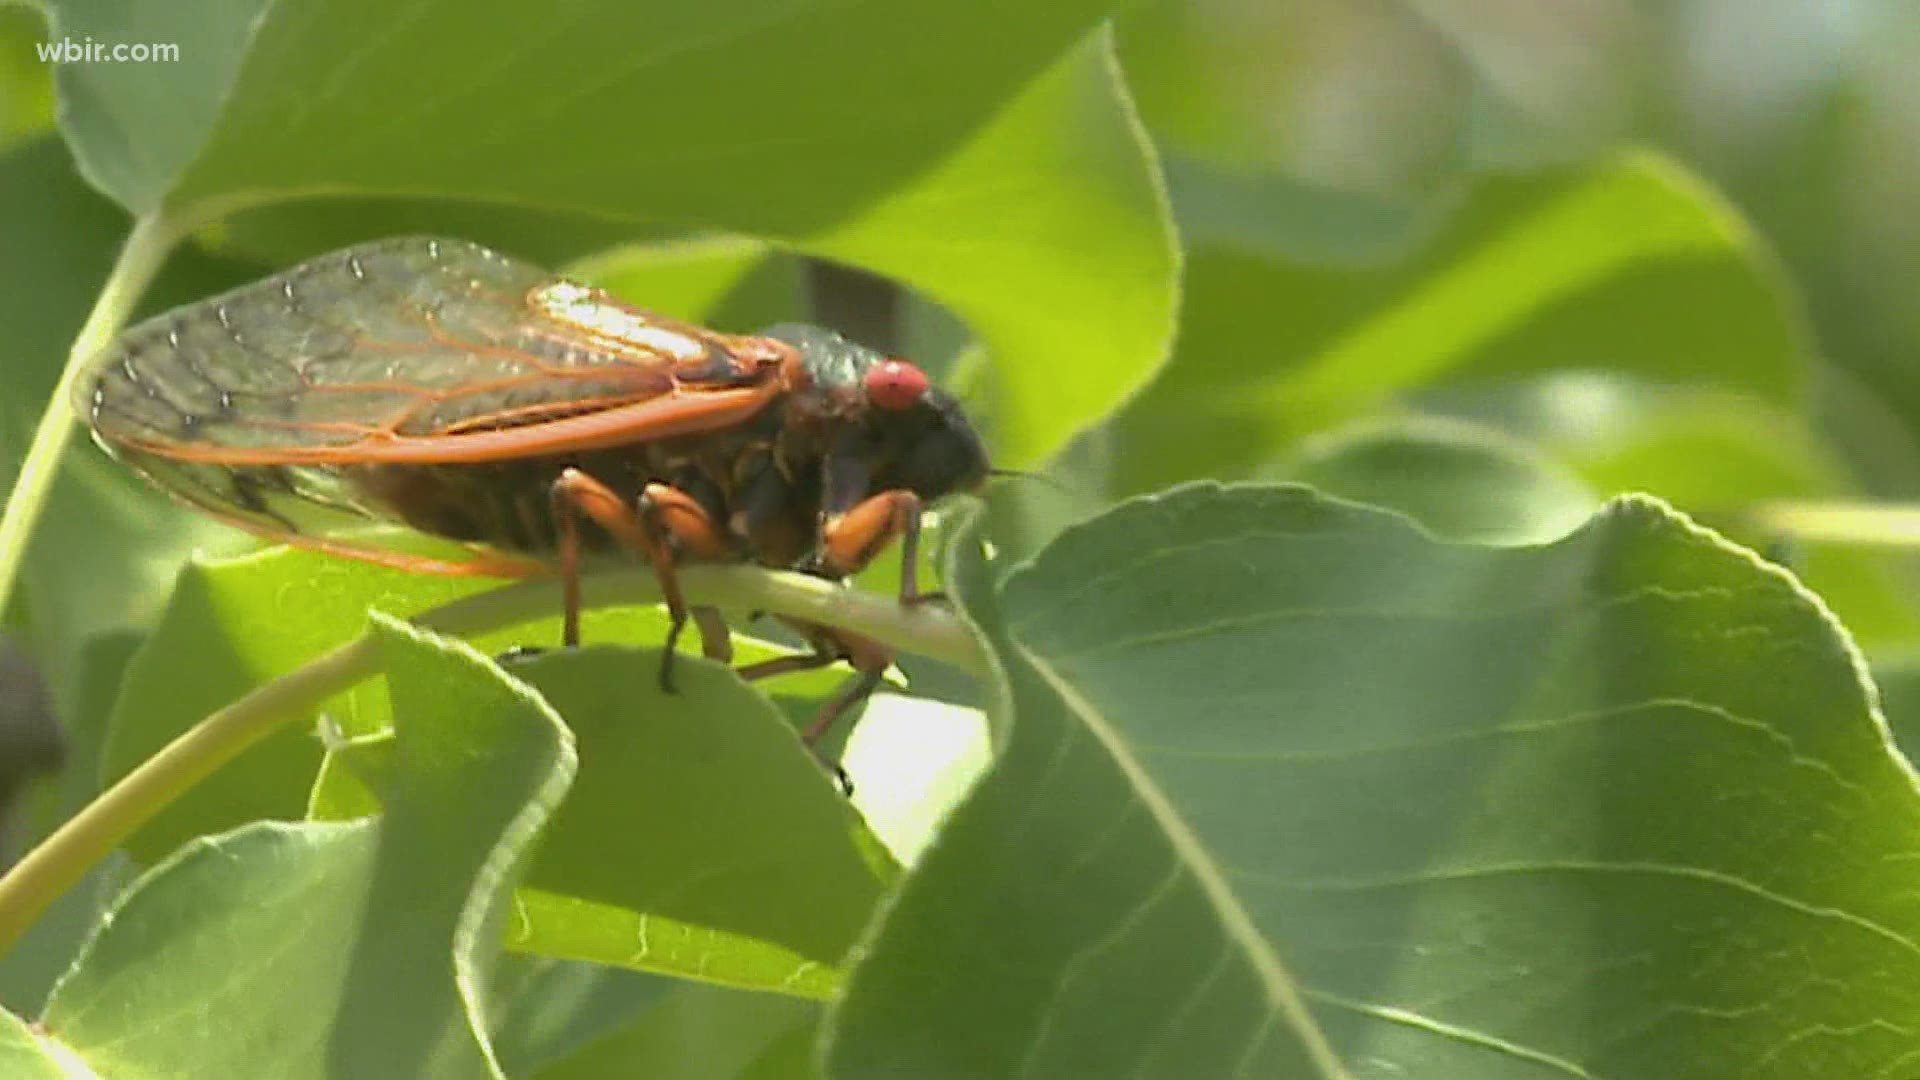 Scientists said cicadas will stick around until mid-June, and when they die they will leave billions of shells across East Tennessee.